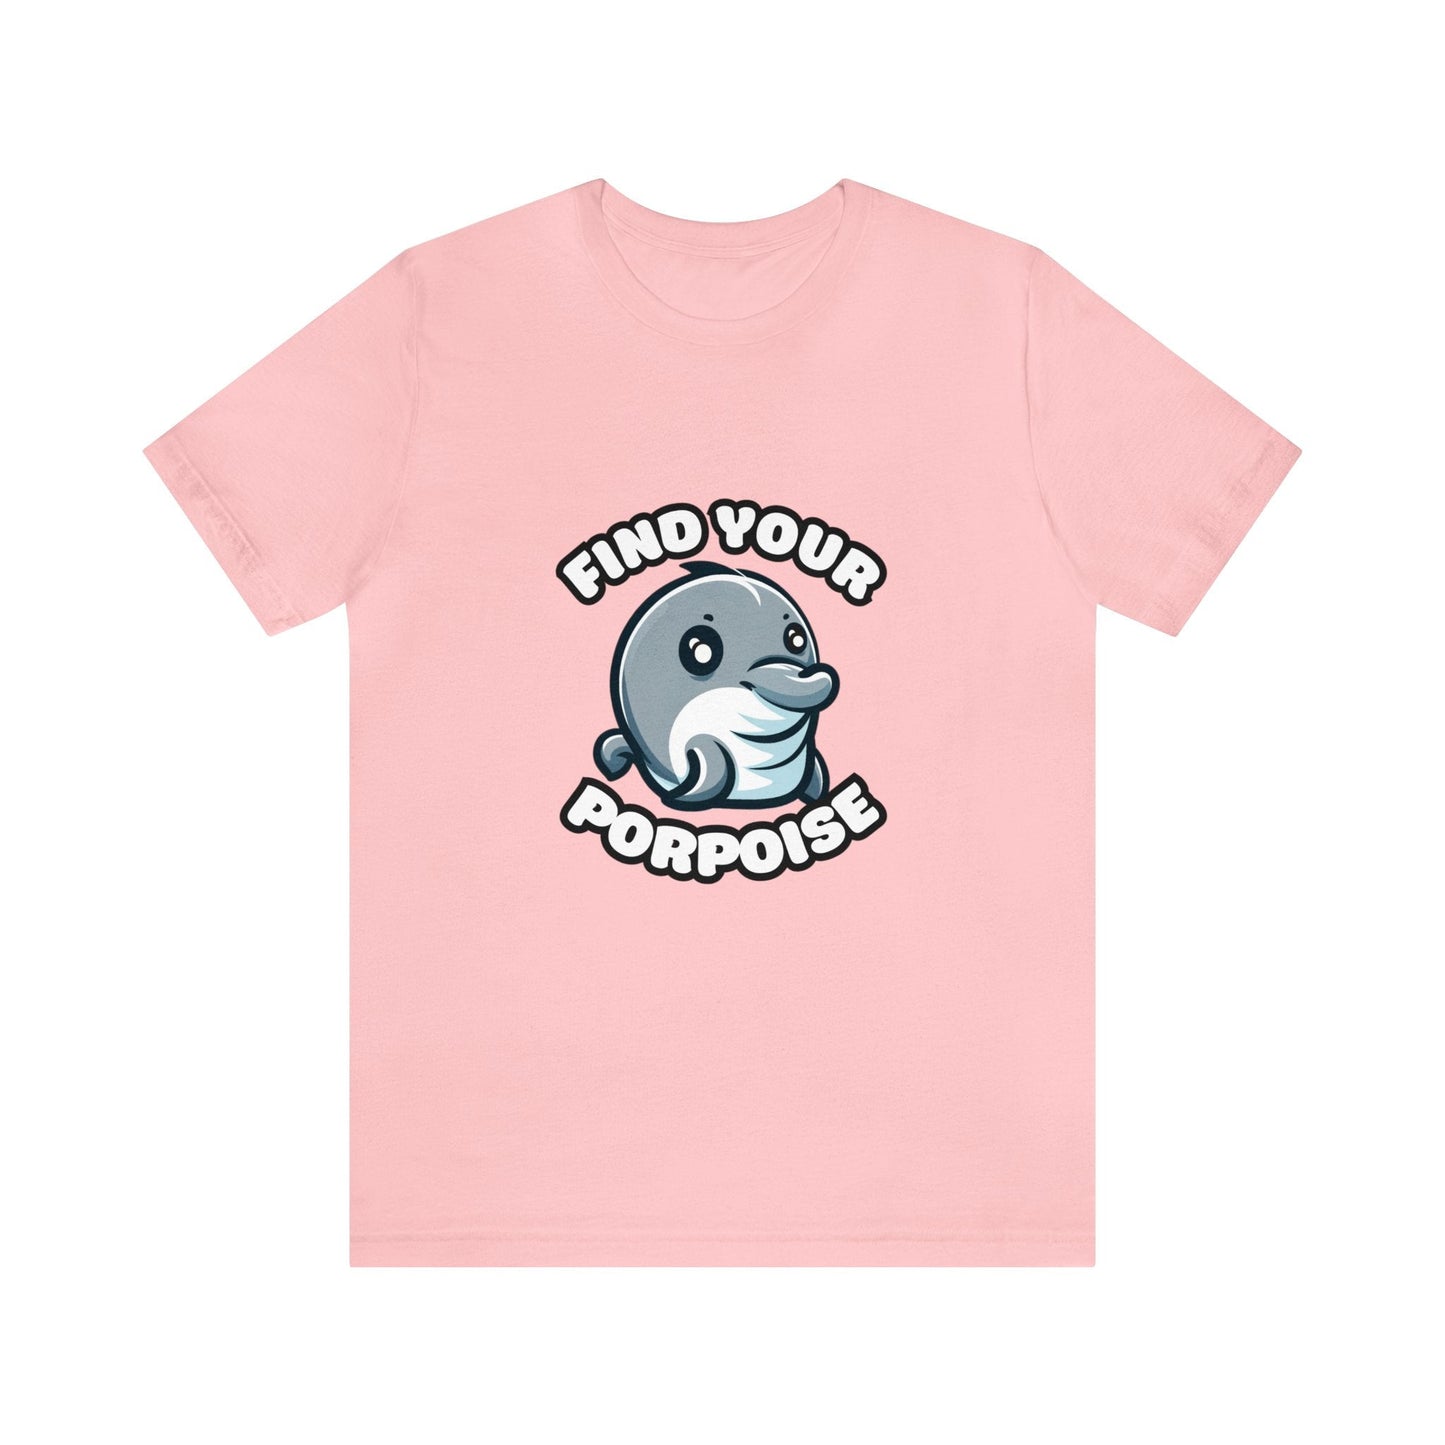 US - Find Your Porpoise - Porpoise T-shirt Pink / XS